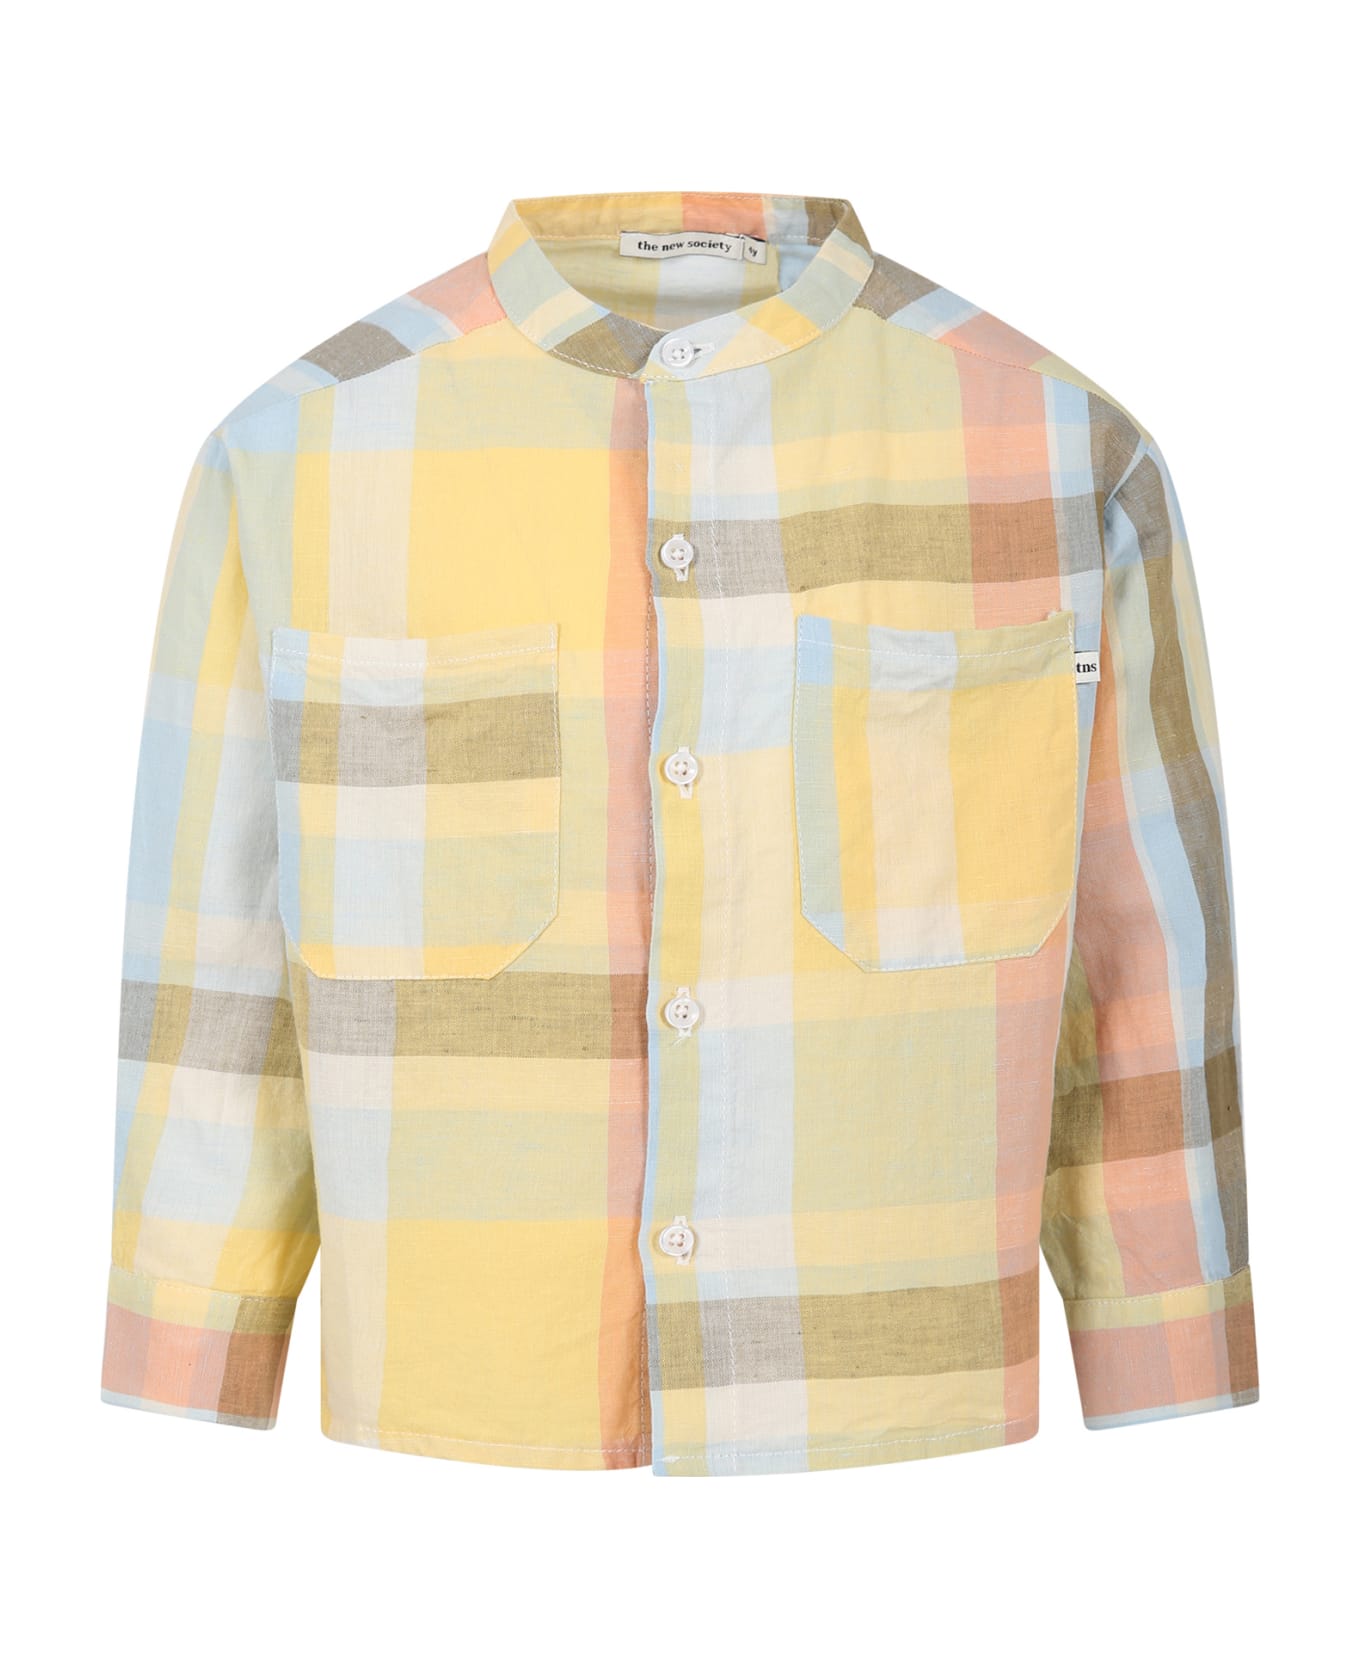 The New Society Multicolor Shirt For Boy With Logo - Multicolor